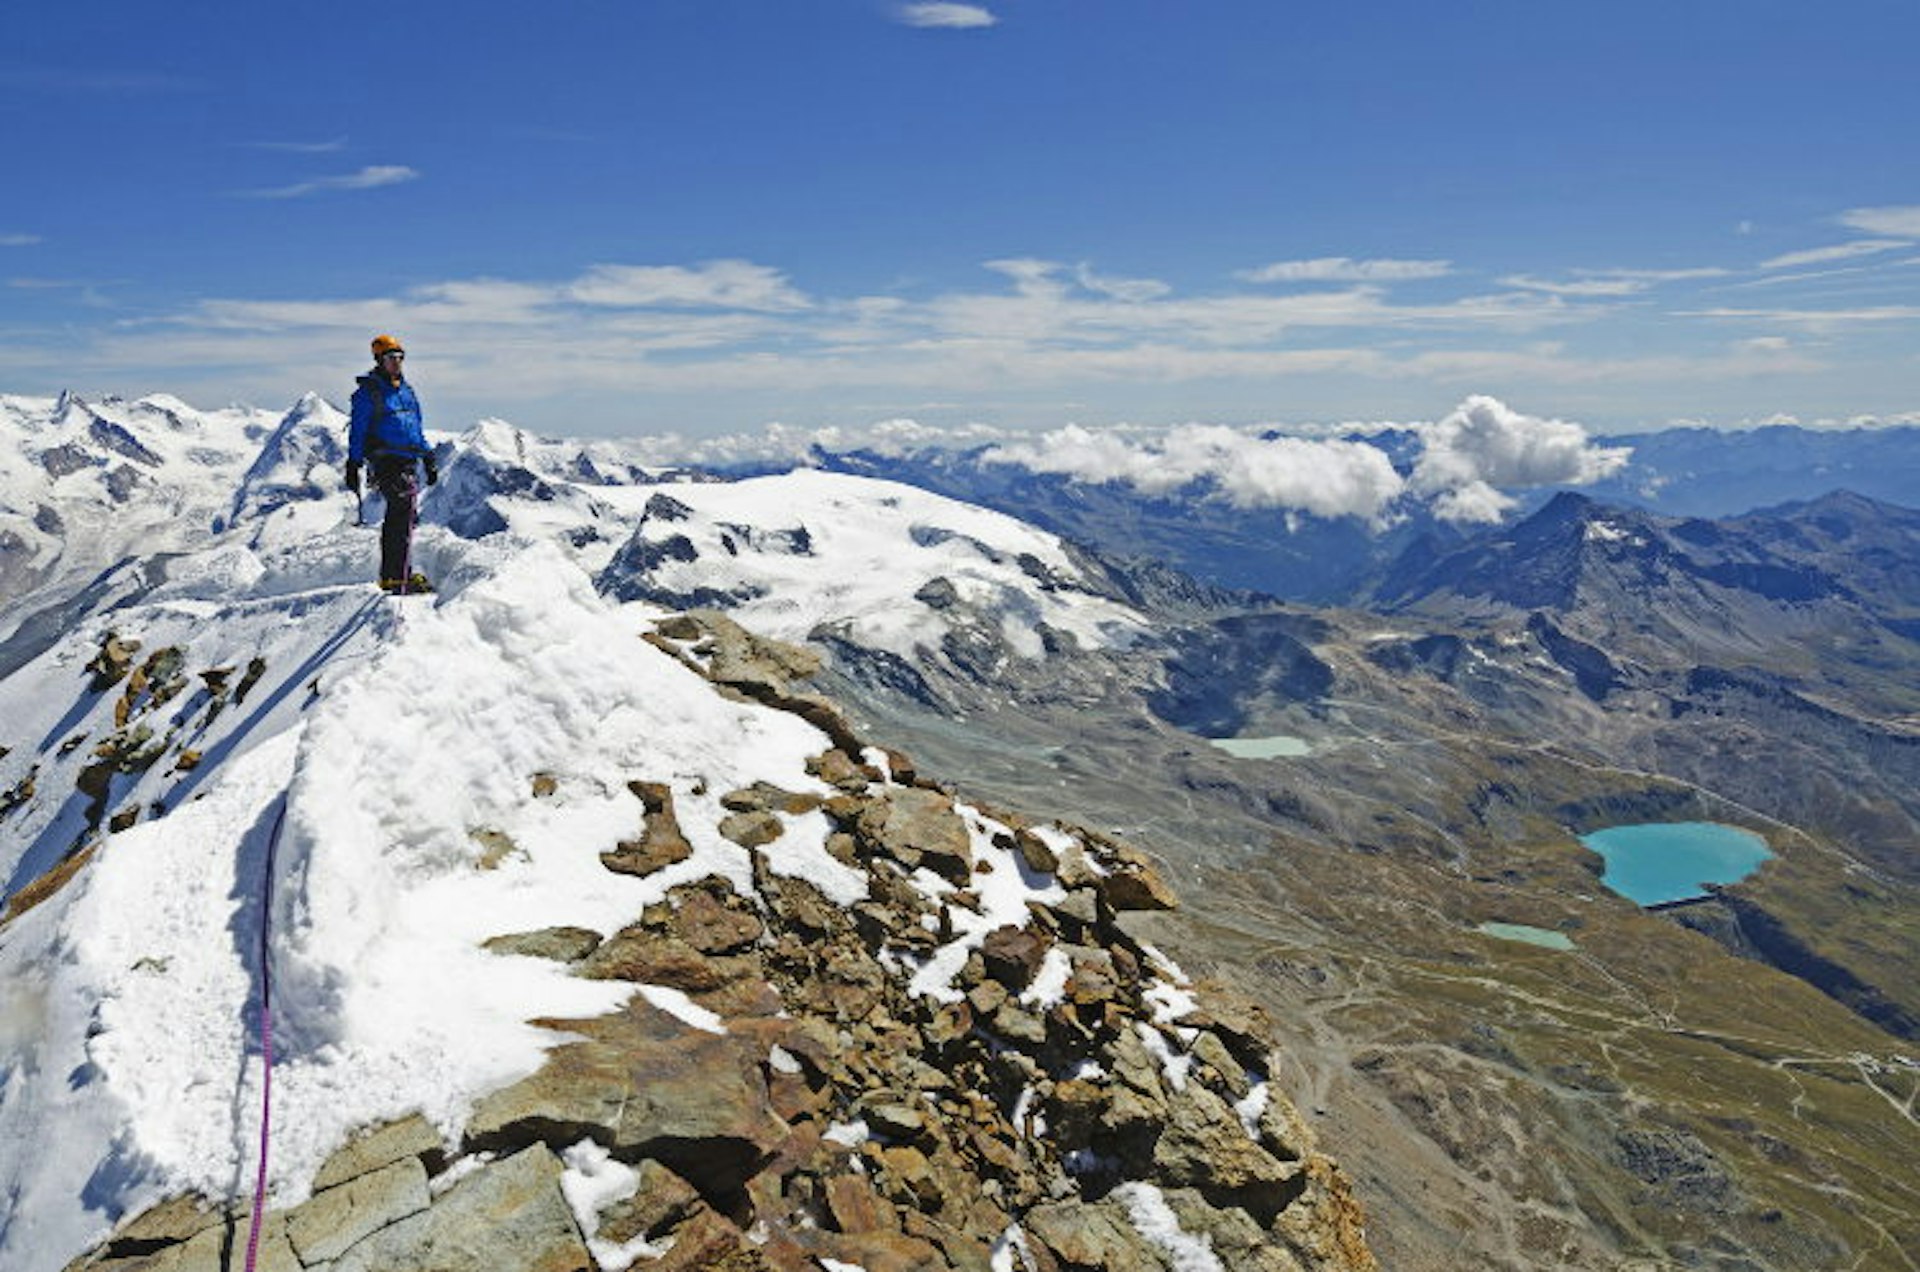 Unbeatable views are the reward for making it to the Matterhorn's summit. Image by Christian Kober/Photostock/Getty